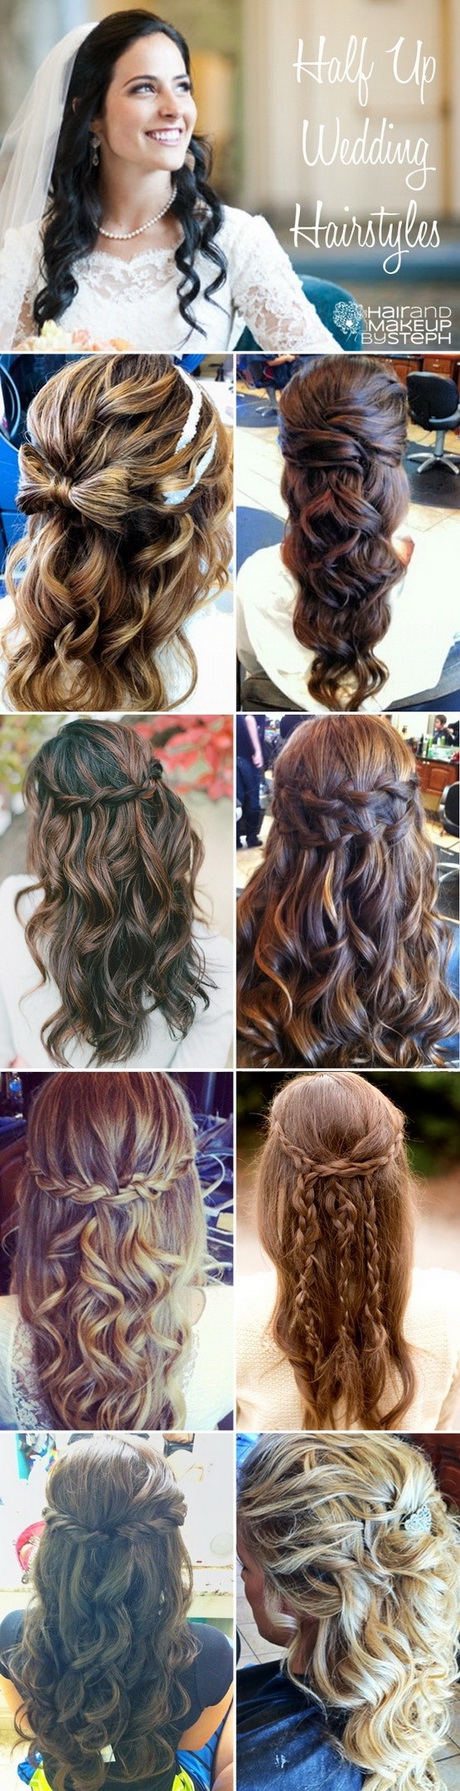 Nice hairstyles for girls with long hair nice-hairstyles-for-girls-with-long-hair-64-6